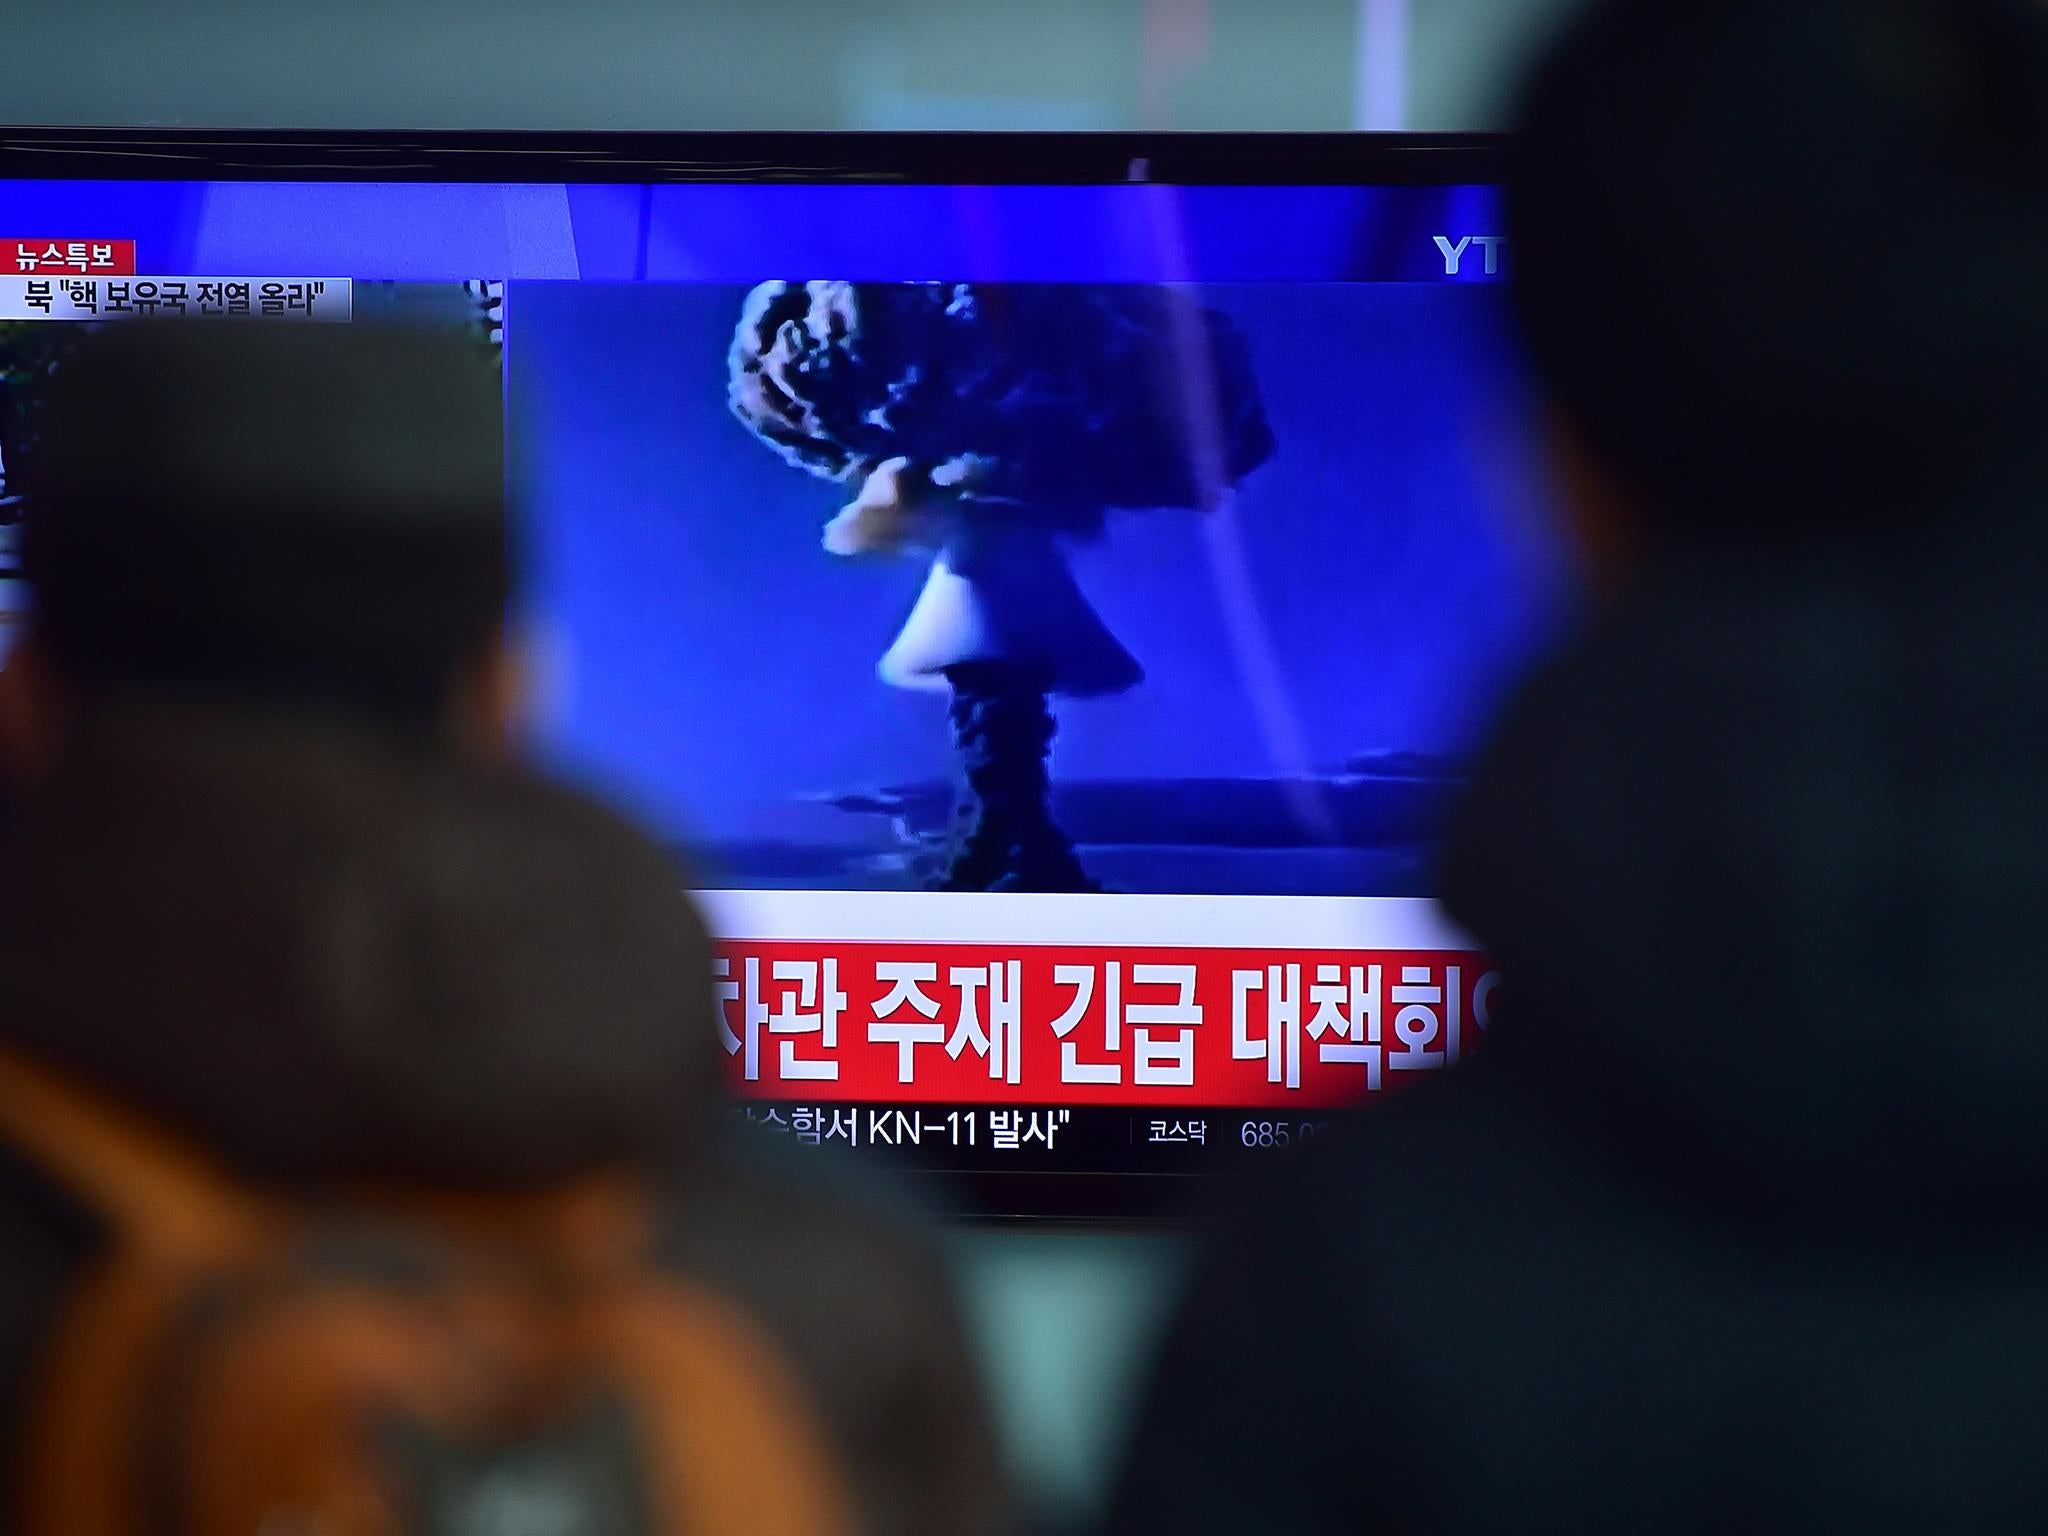 North Korea’s continued efforts to develop a long-range nuclear weapon is one issue of concern